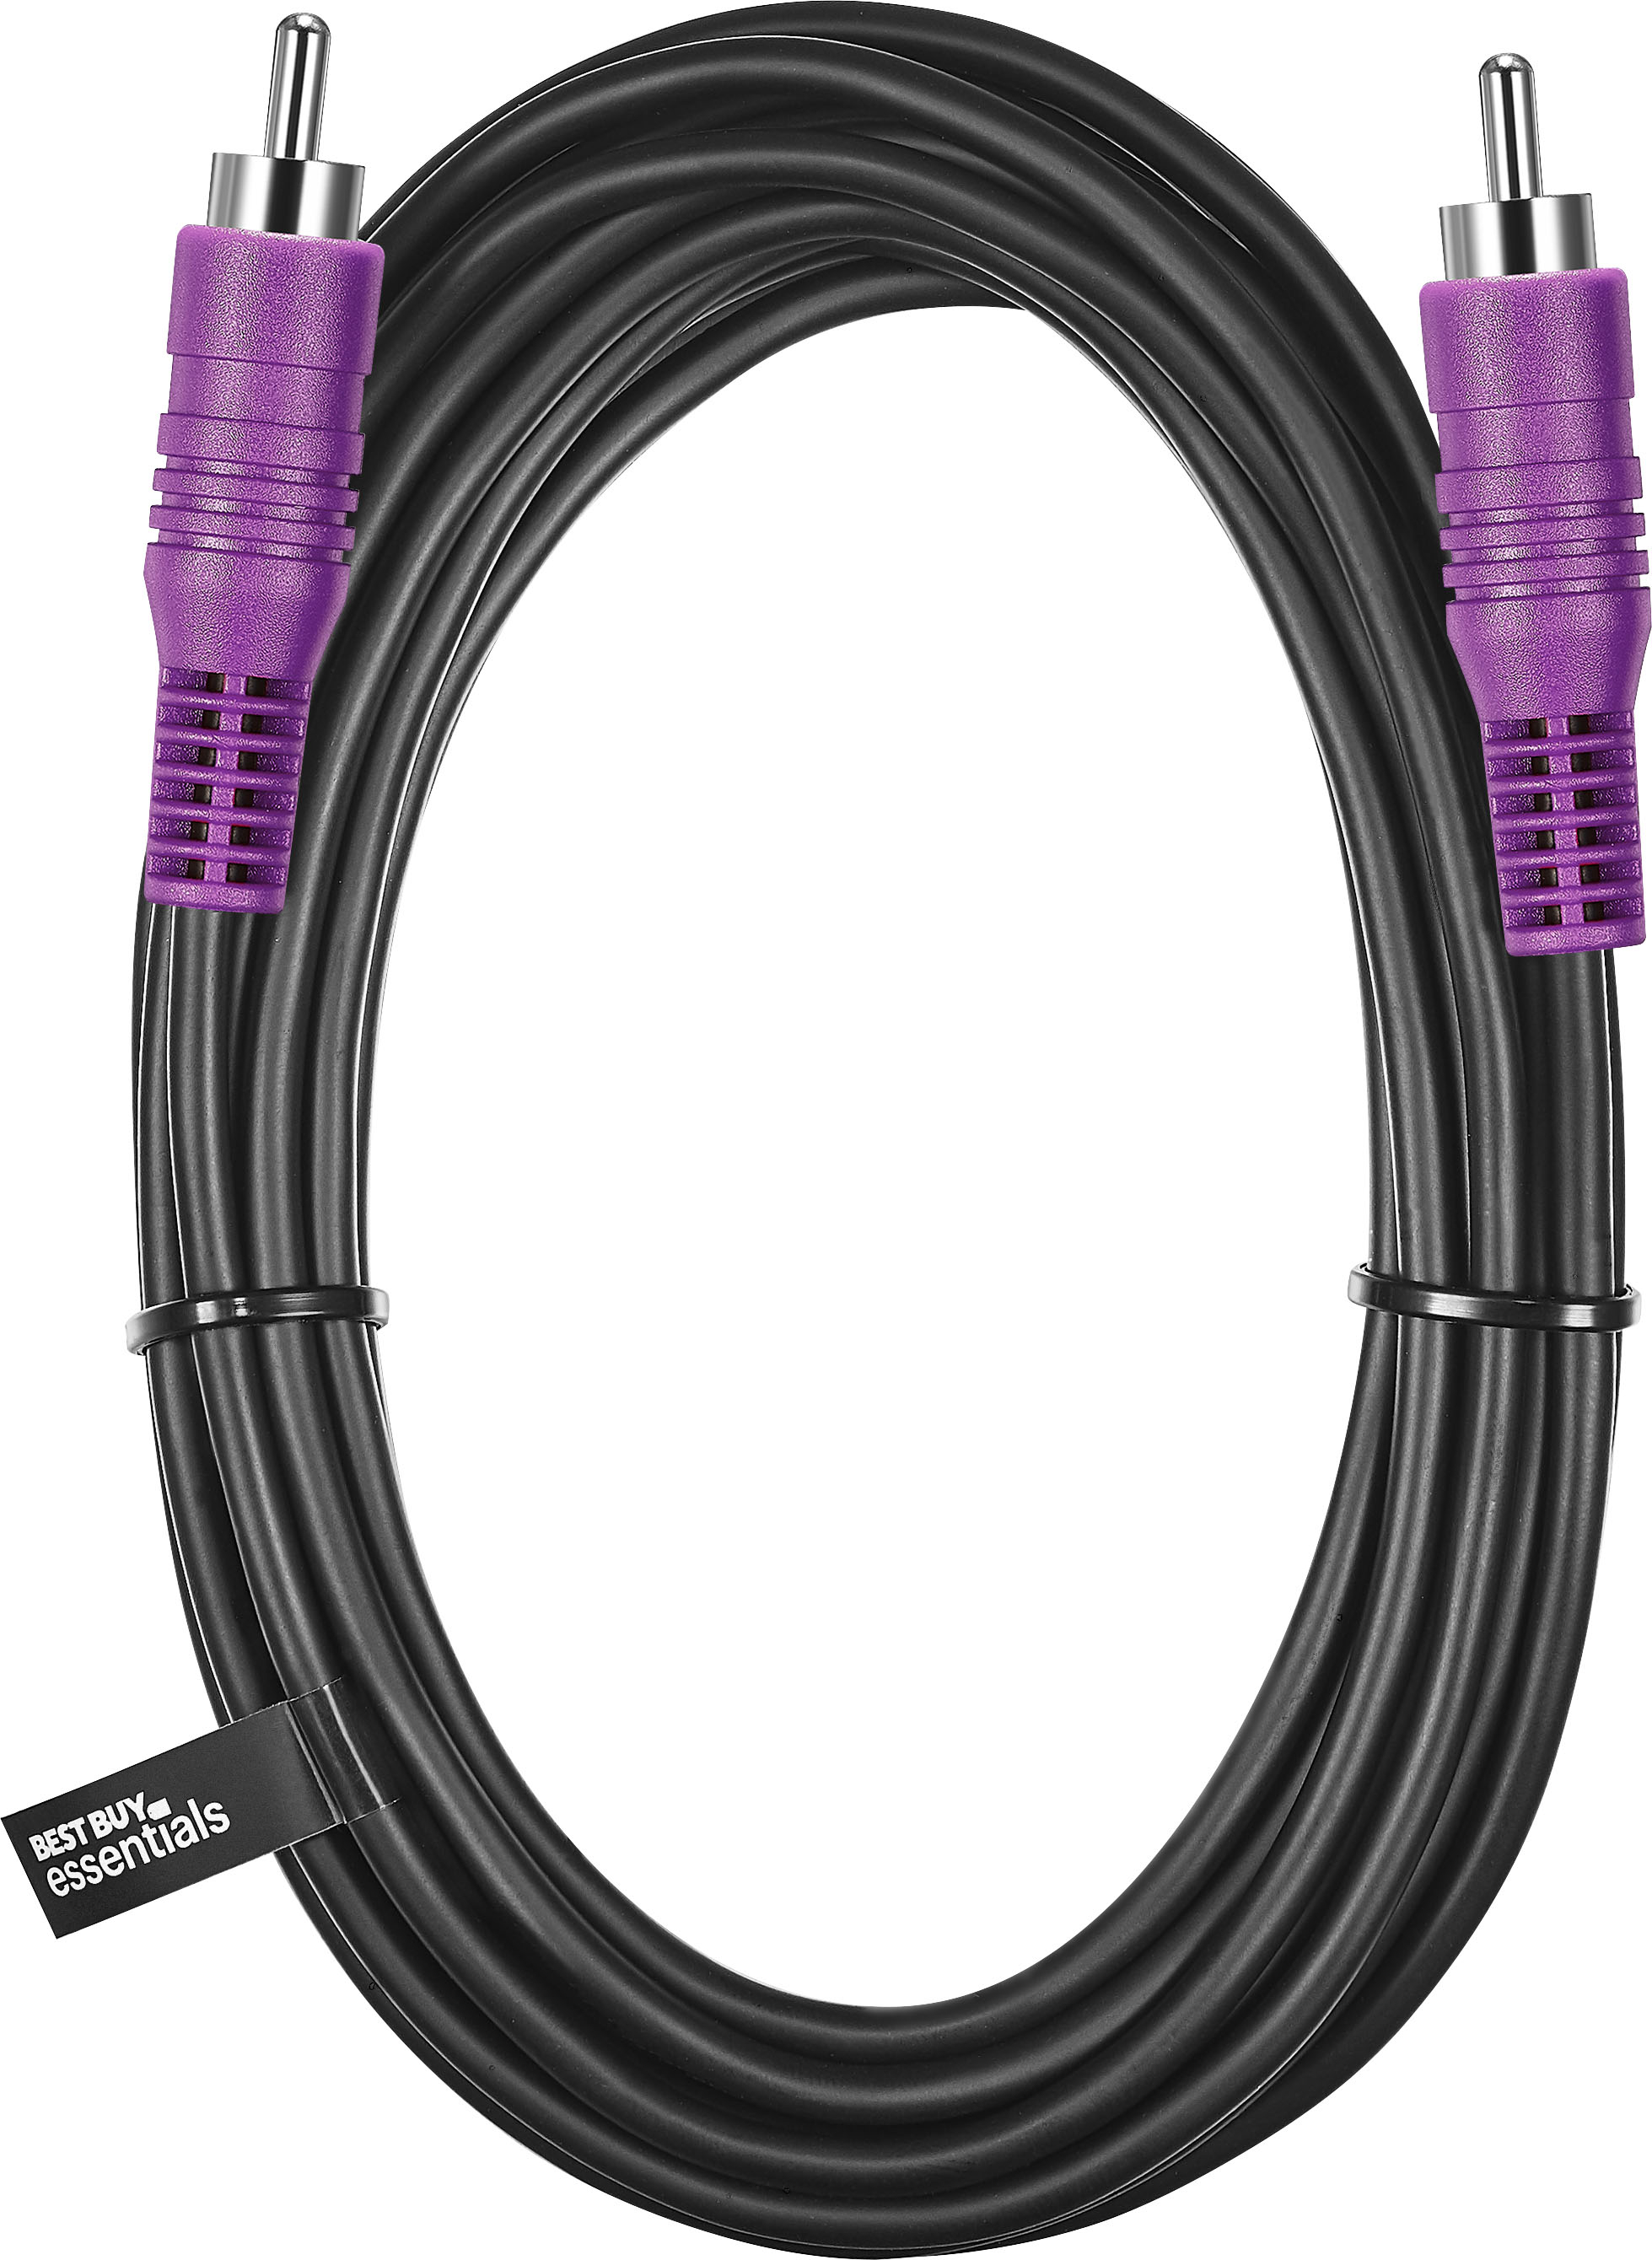 Best Buy essentials™ 15' Subwoofer Cable Black BE-HCL325 - Best Buy